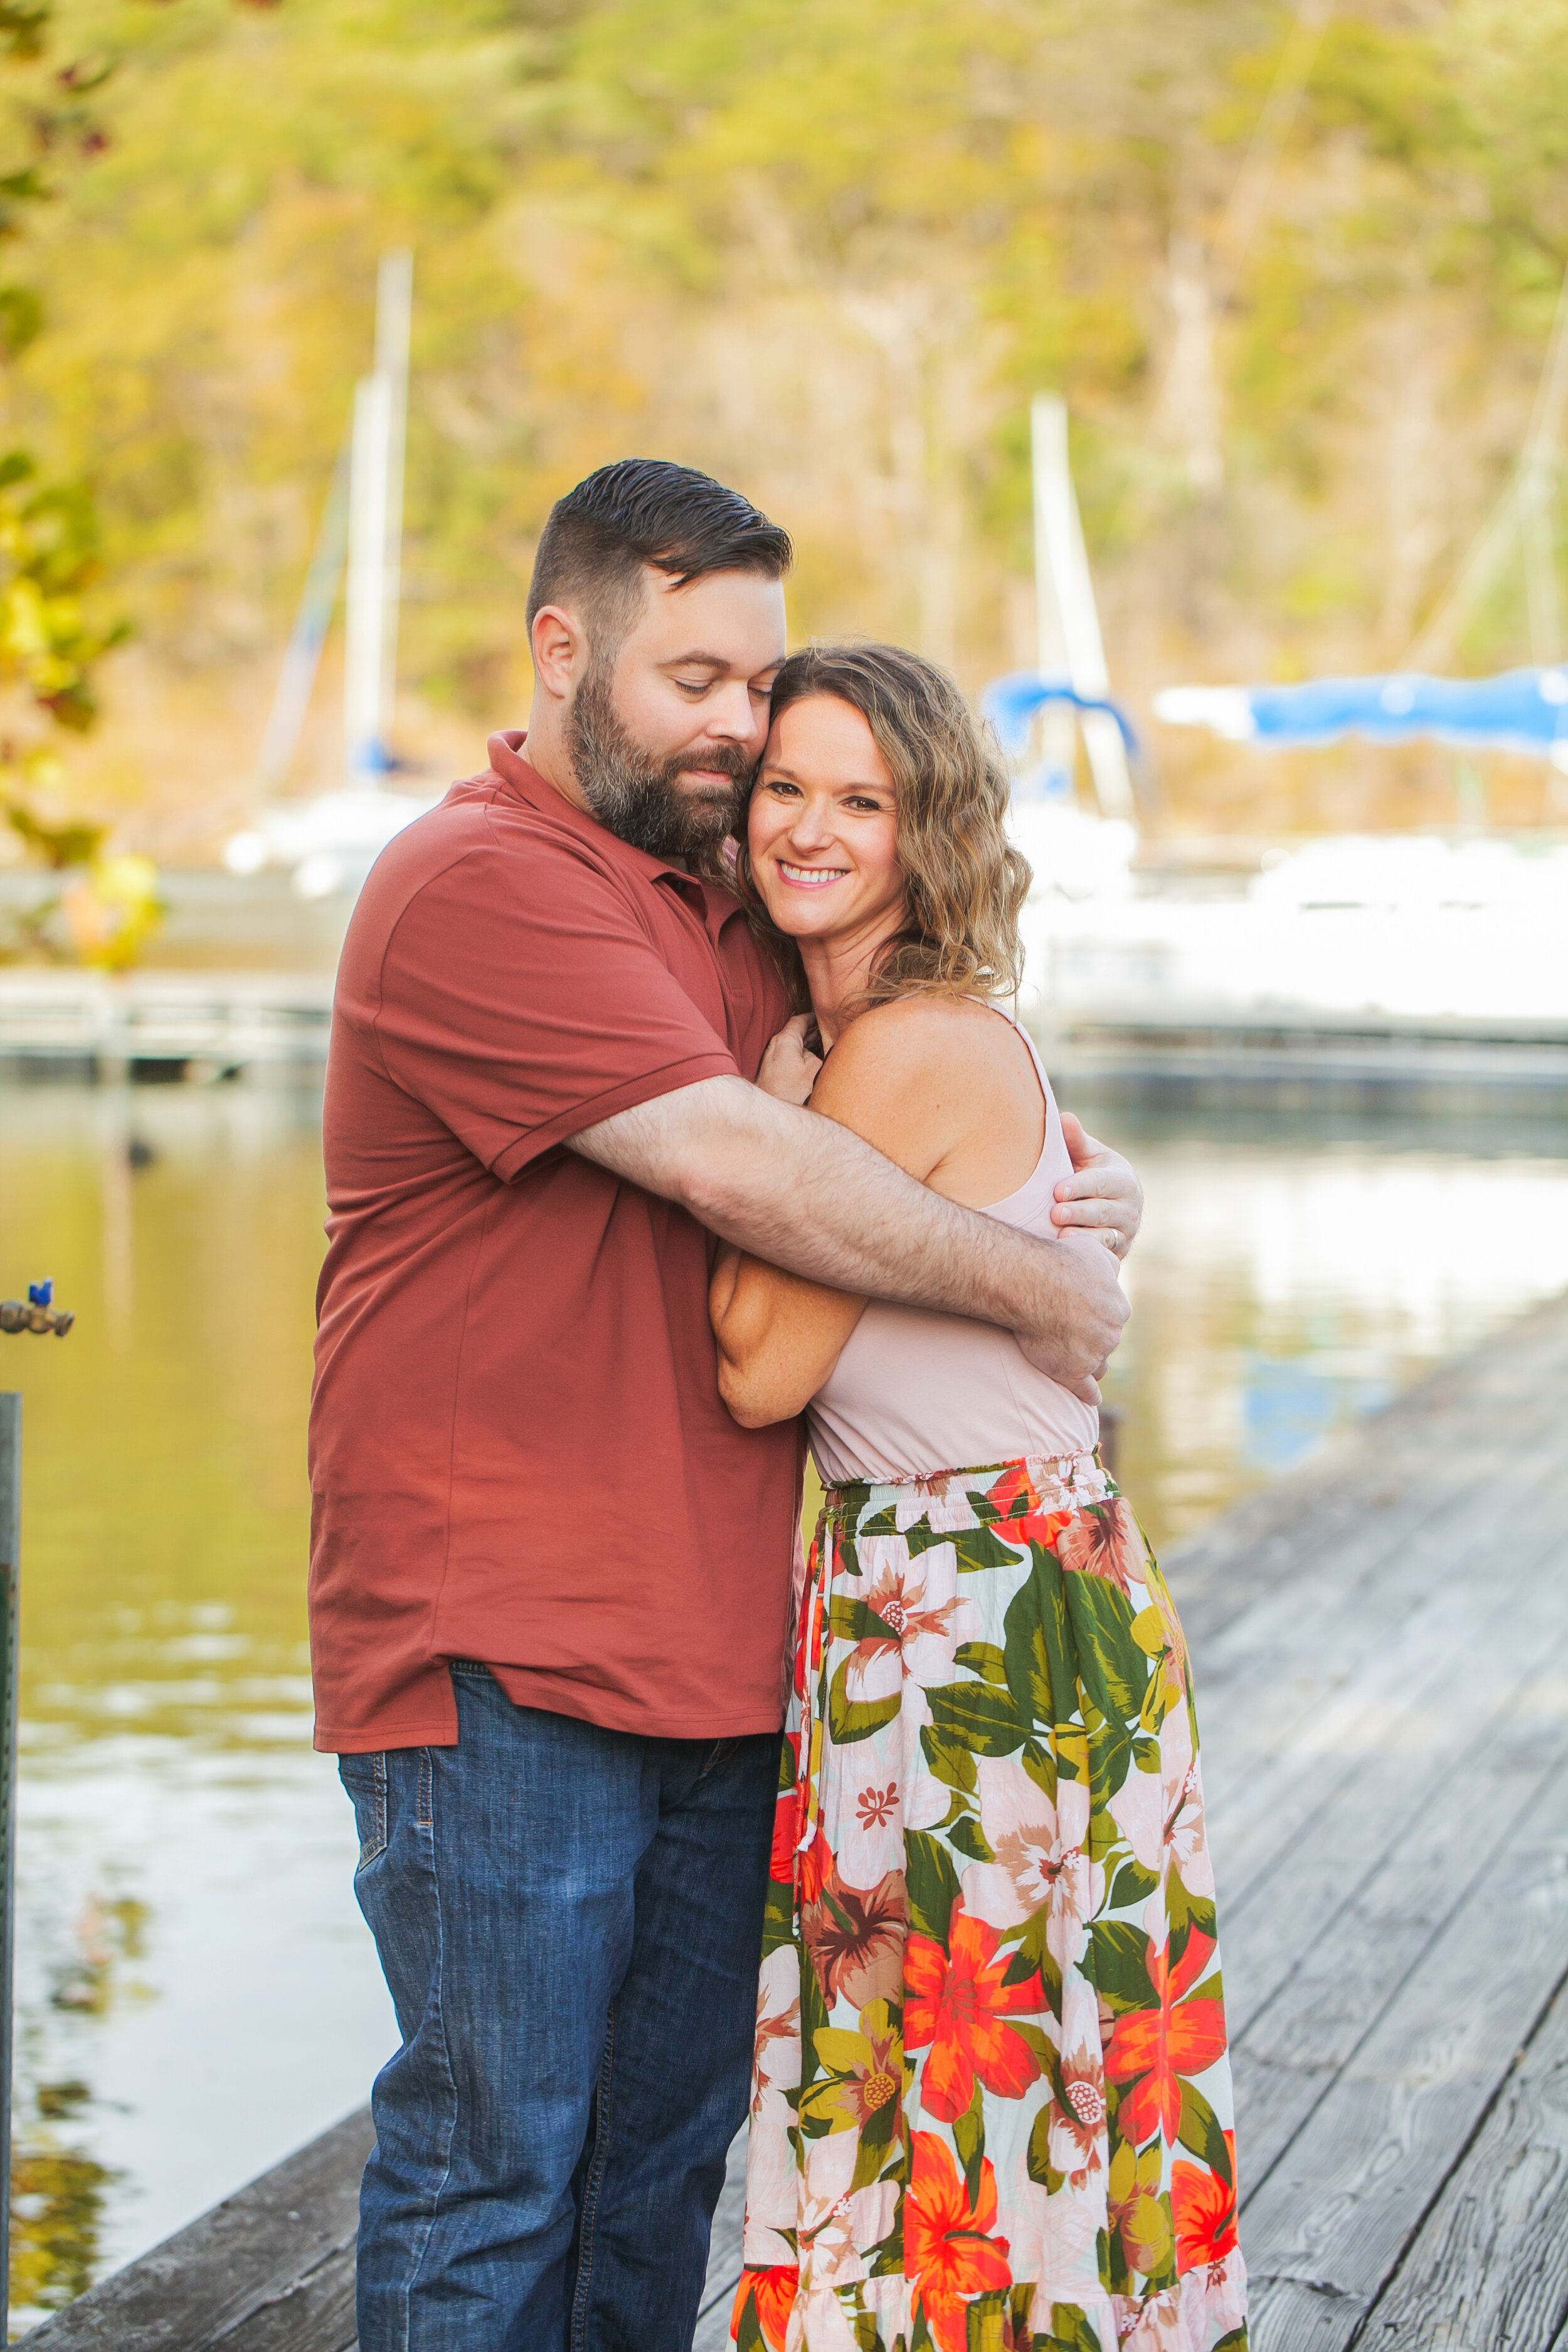 couples-portrait-loving-mom-dad-dock-lake-family-photo-session-colleyville-tx